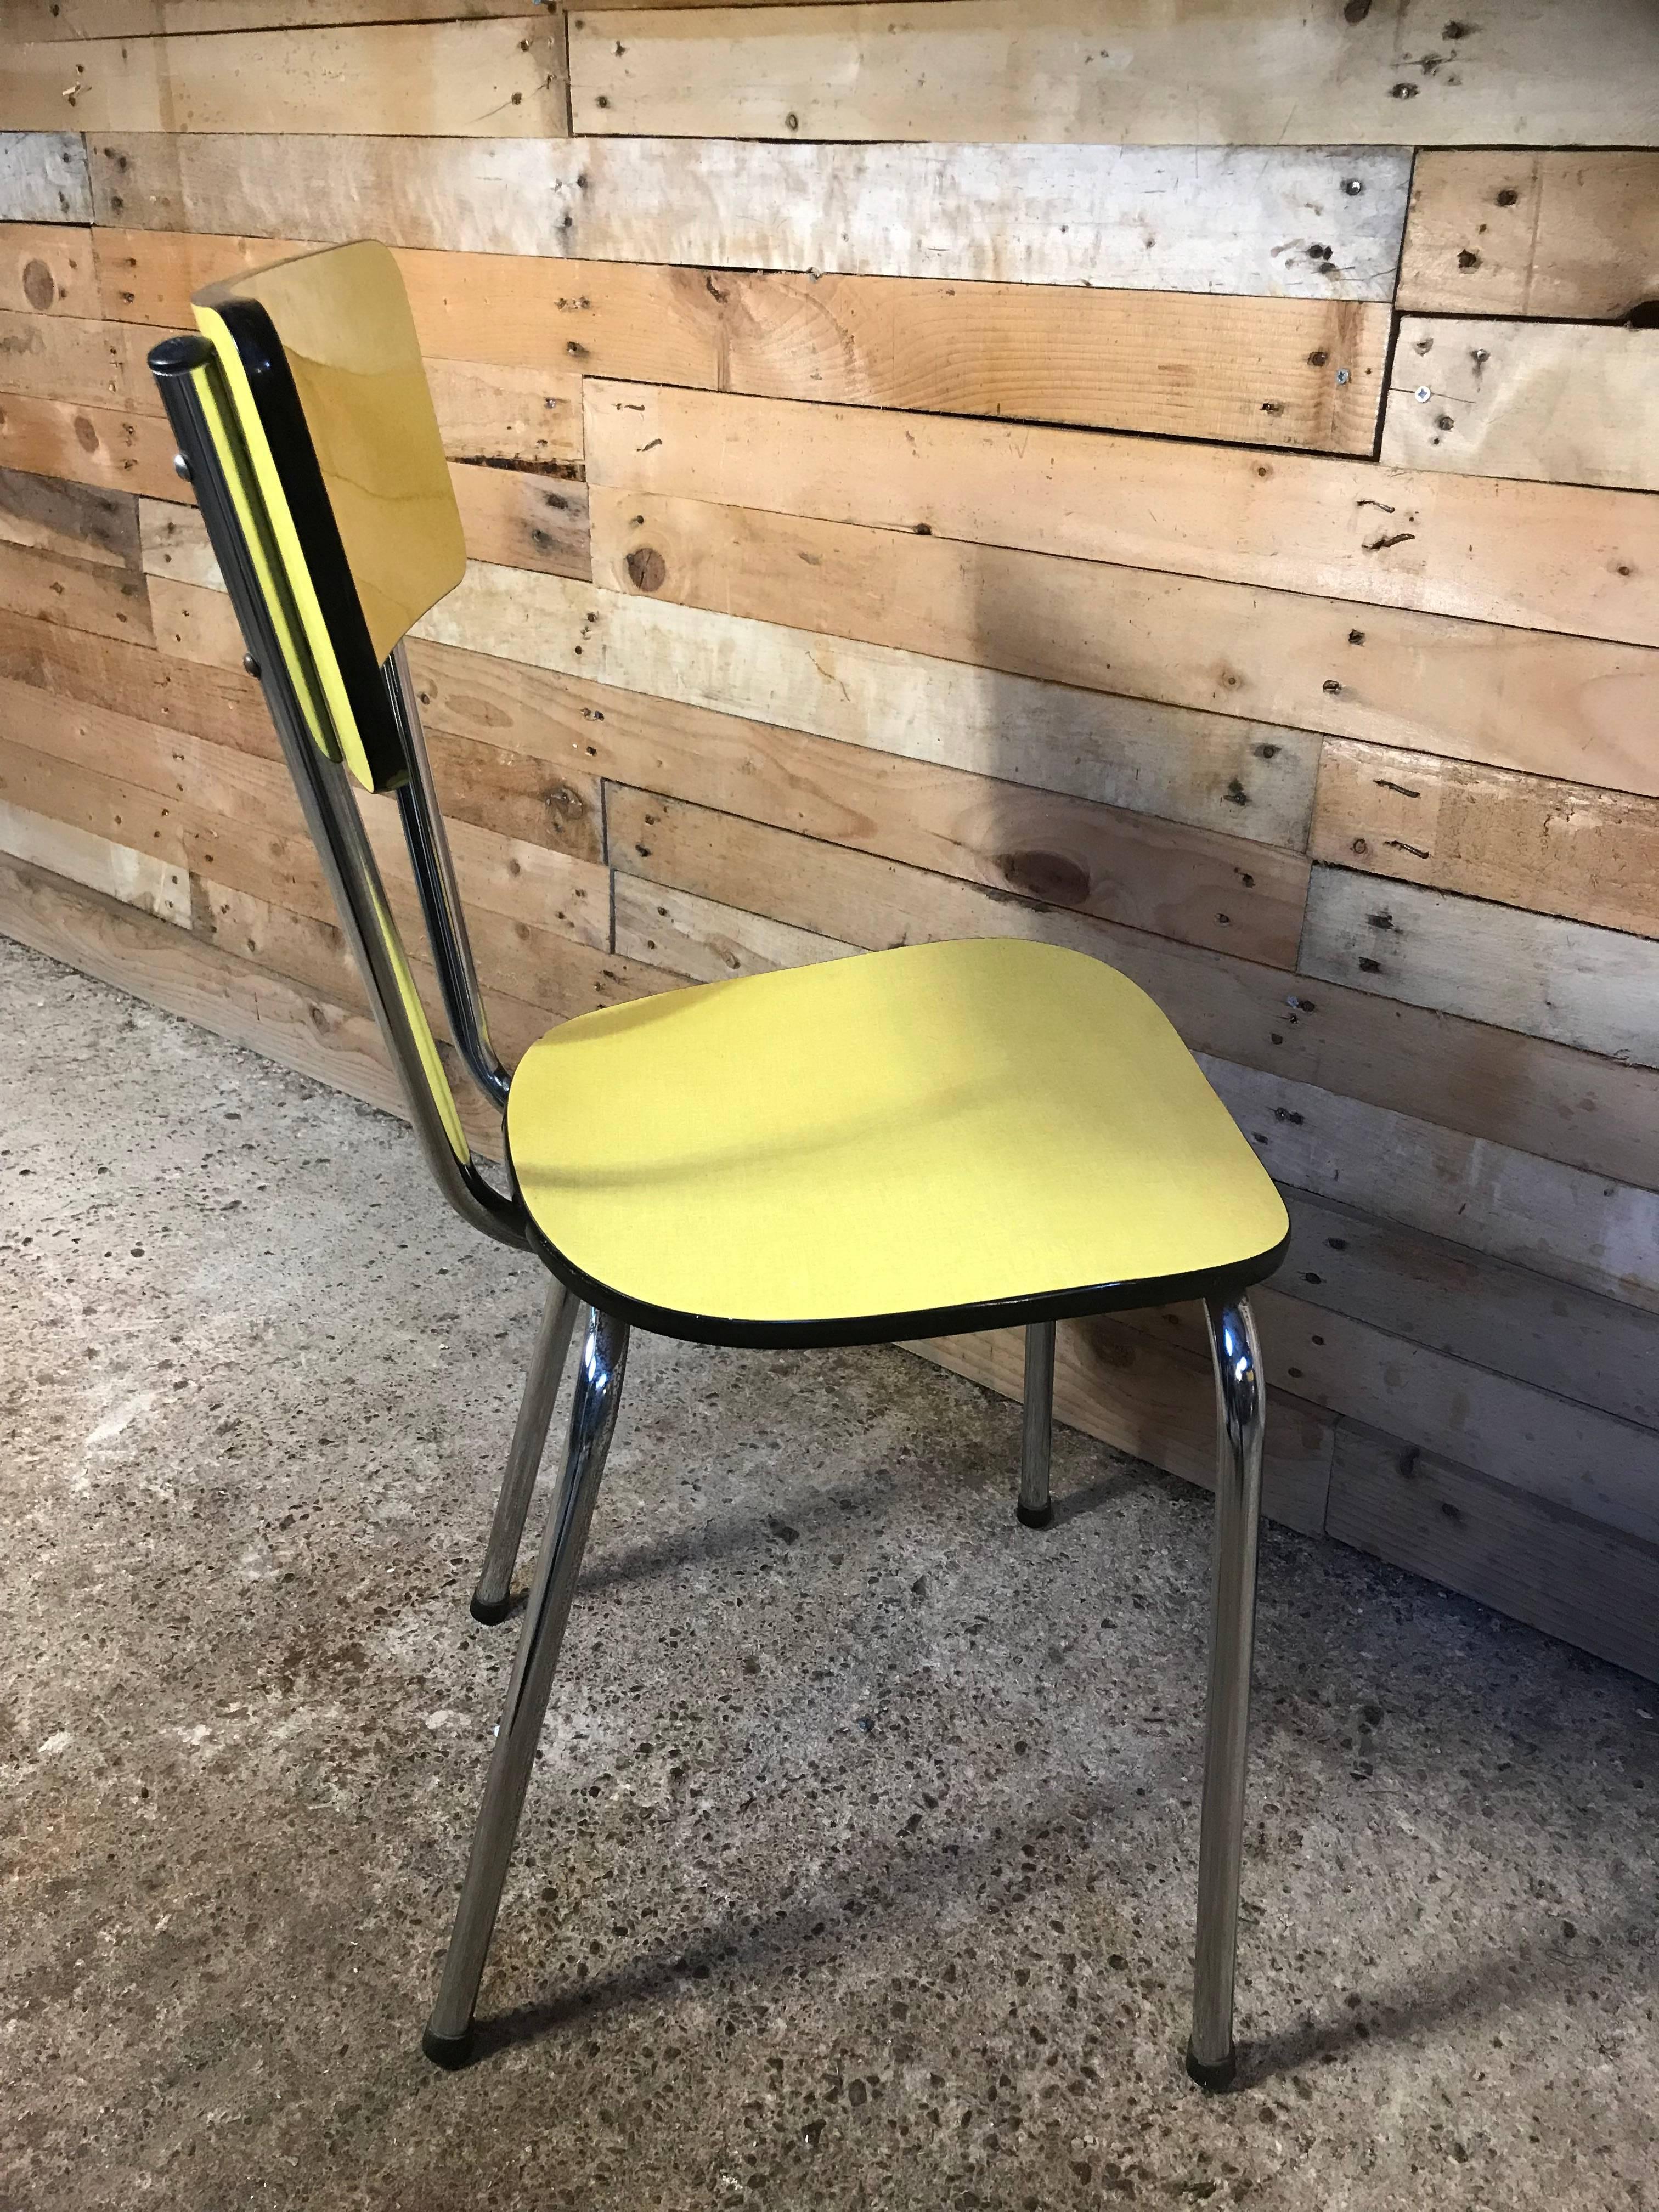 1950s vintage retro yellow and chrome chairs, Measures: Seat height is 45 cm or 18 in.